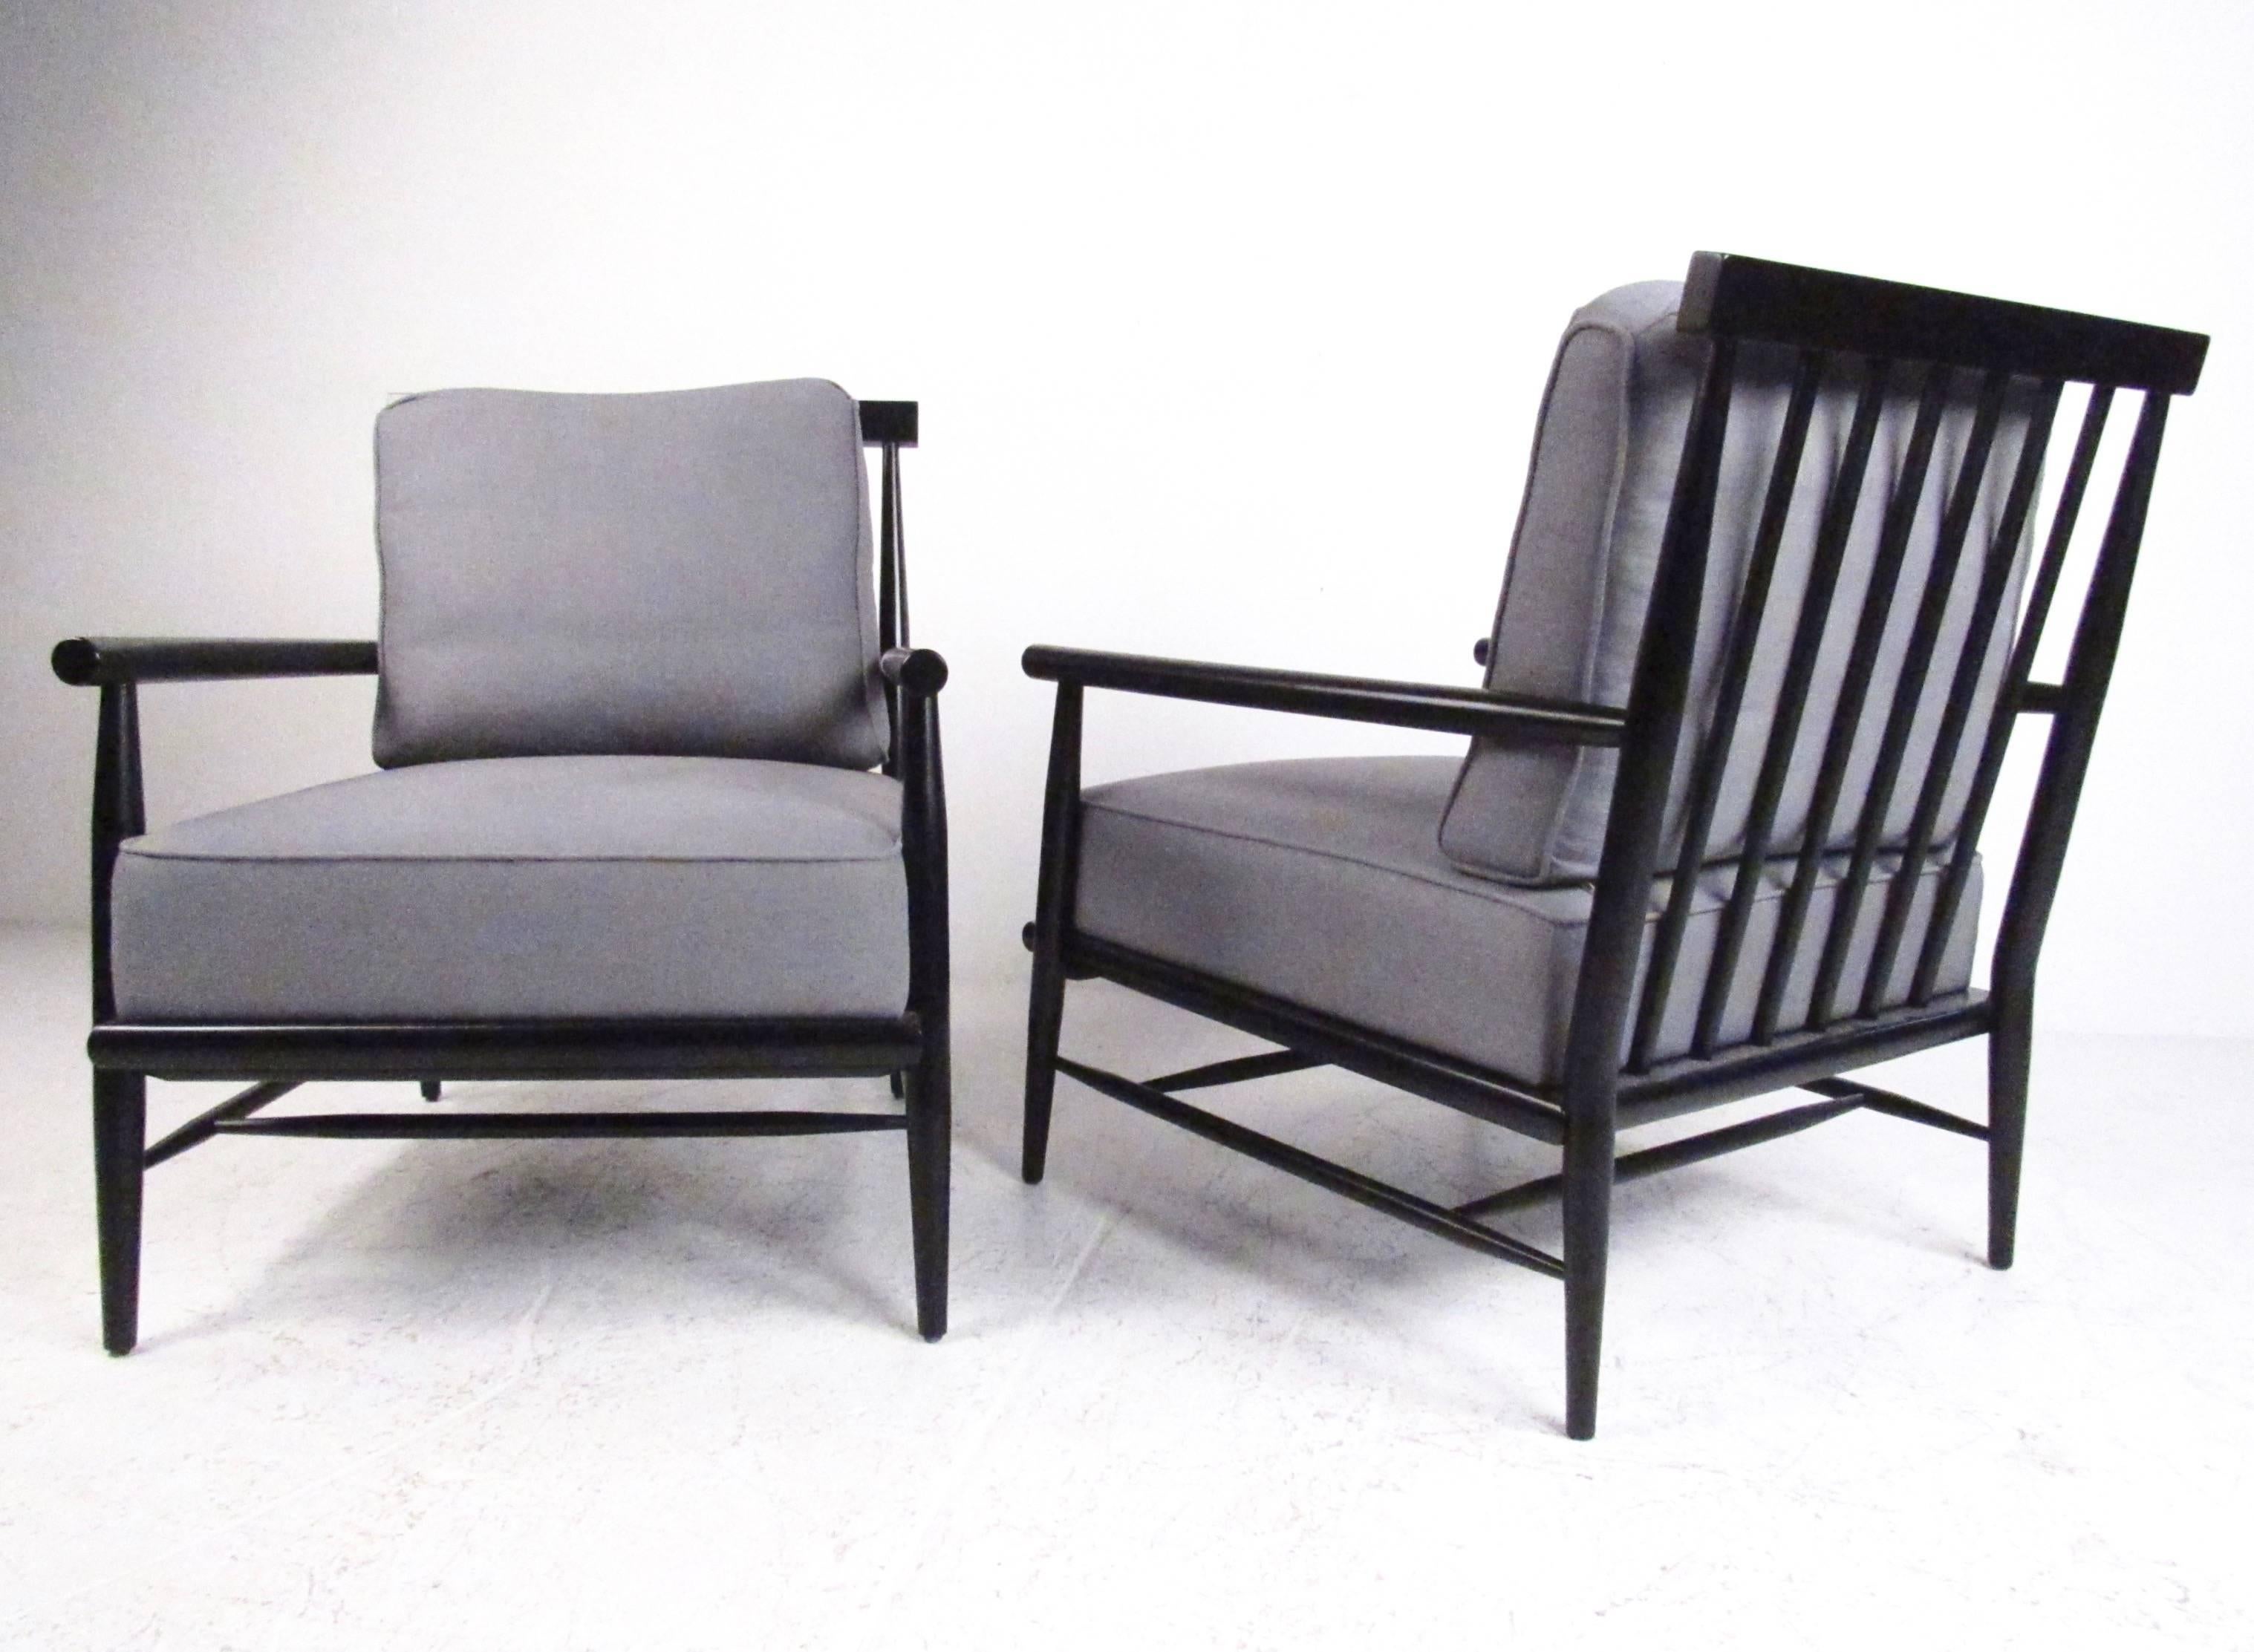 This exquisite pair of modern lounge chairs feature sculpted ebonized frames in a unique Paul McCobb style. Spoked seat backs set with tapered frames provide a wide base for these comfortable and stylish armchairs. Impressive vintage modern addition